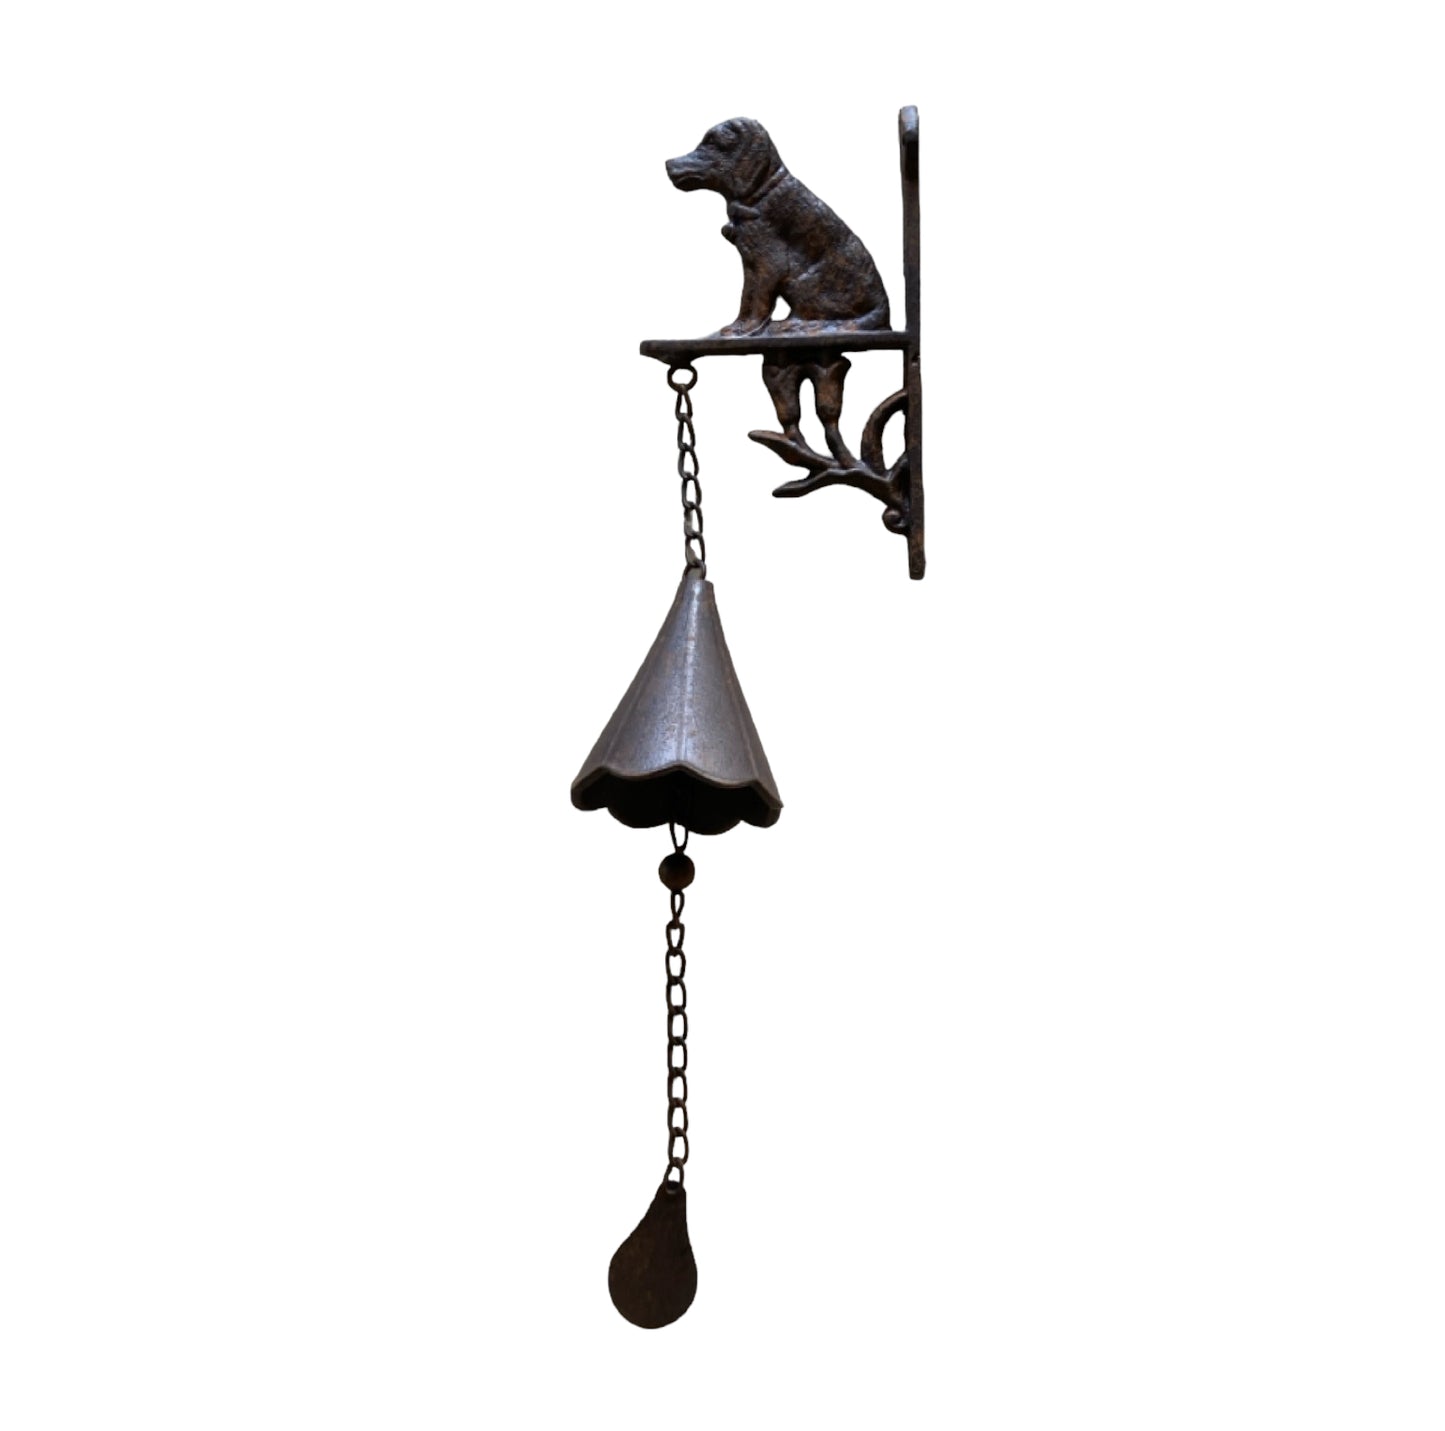 Door Bell Dog Pooch Rustic Cast Iron - The Renmy Store Homewares & Gifts 